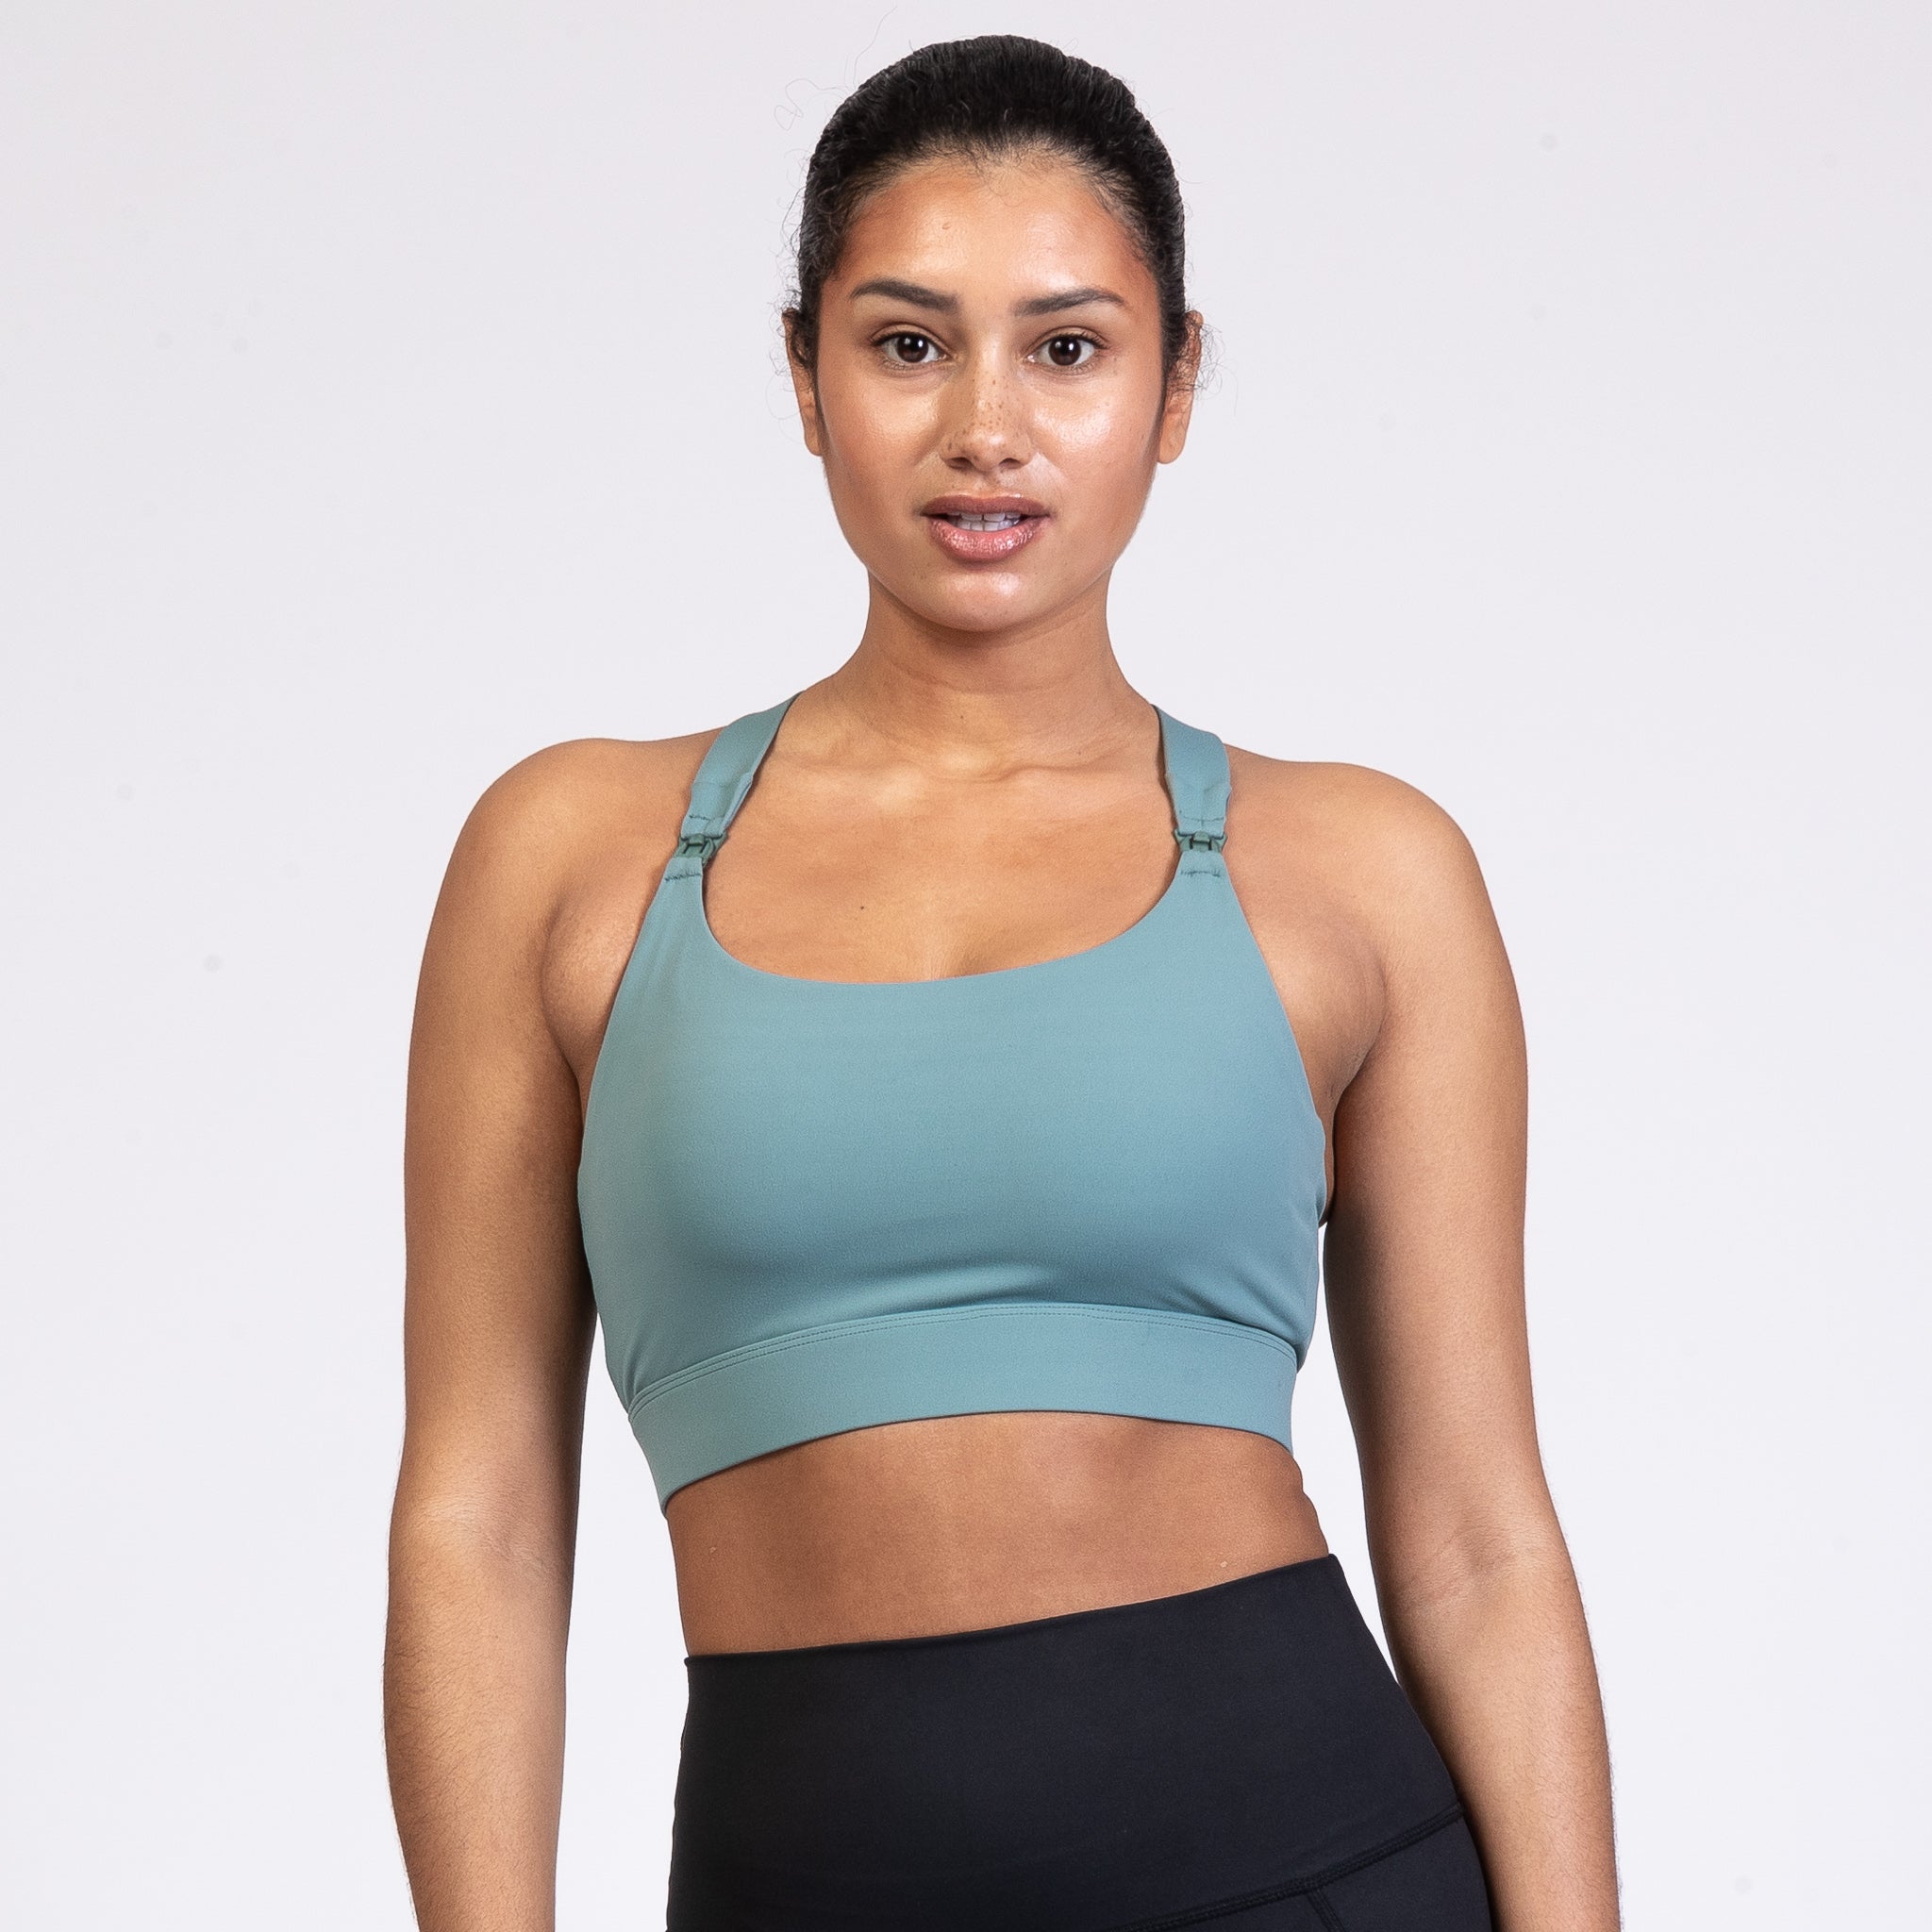 Venice 3 Ultimate Support Full Coverage Nursing & Pumping Sports Bra  (Seagrass)